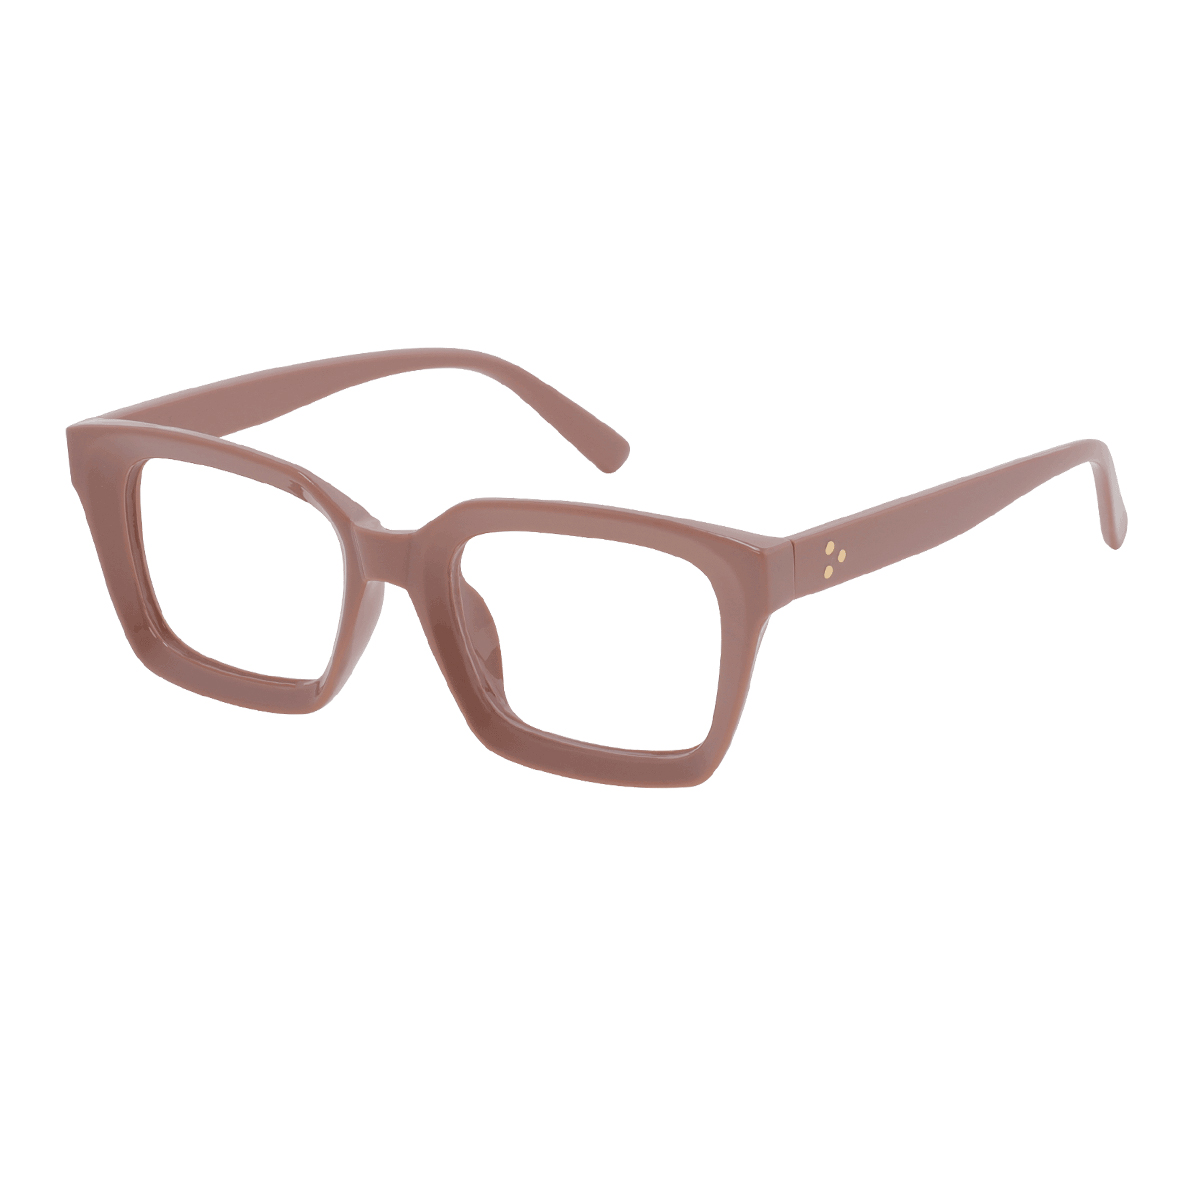 Crouch - Square Coffee Reading Glasses for Men & Women